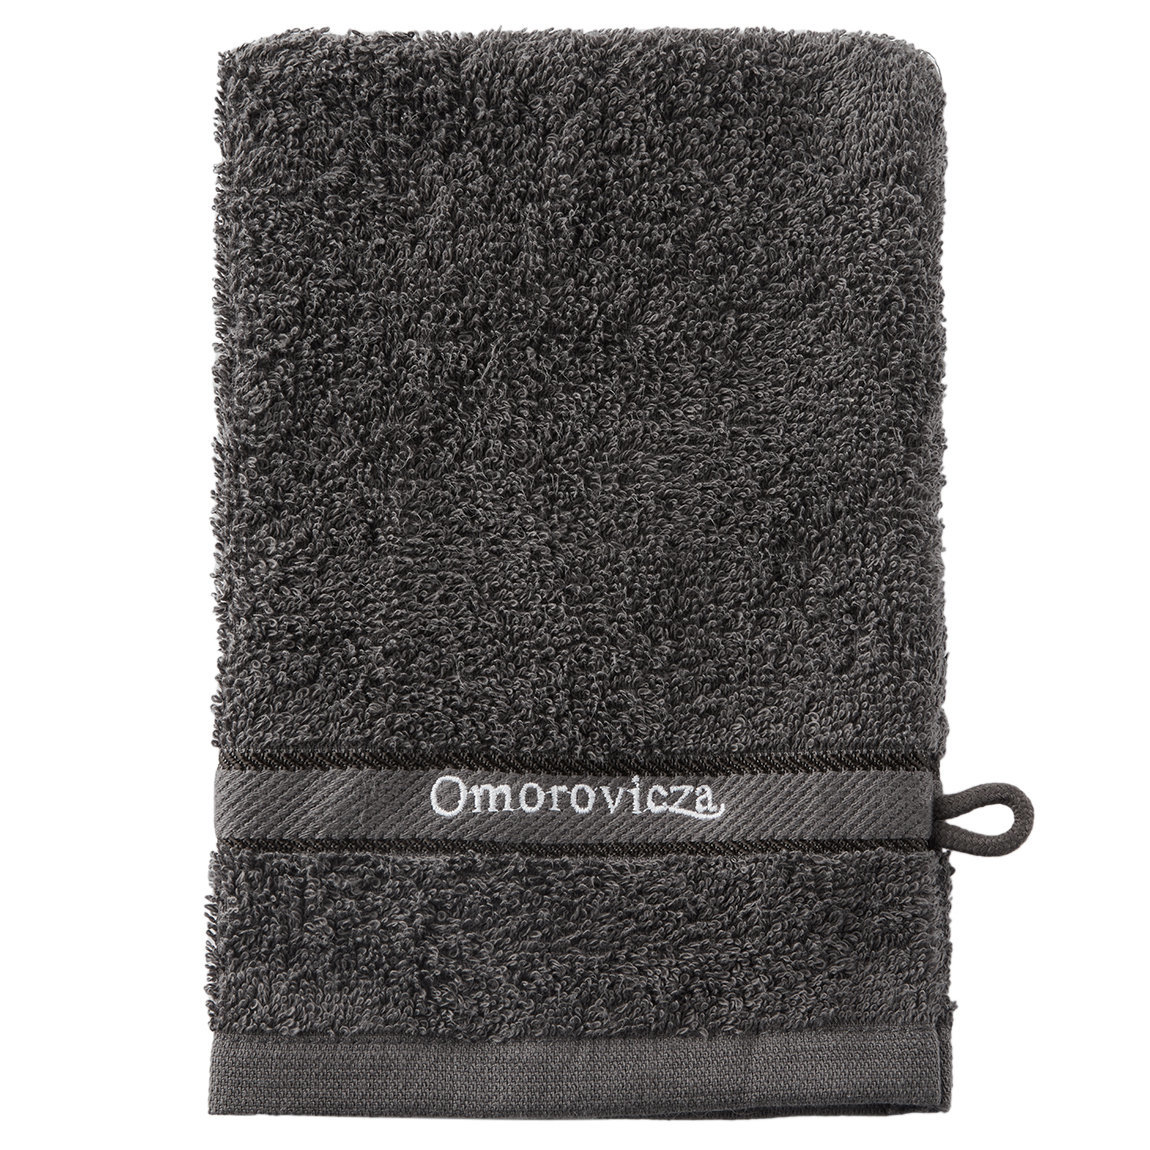 Omorovicza Cleansing Mitt Grey alternative view 1 - product swatch.